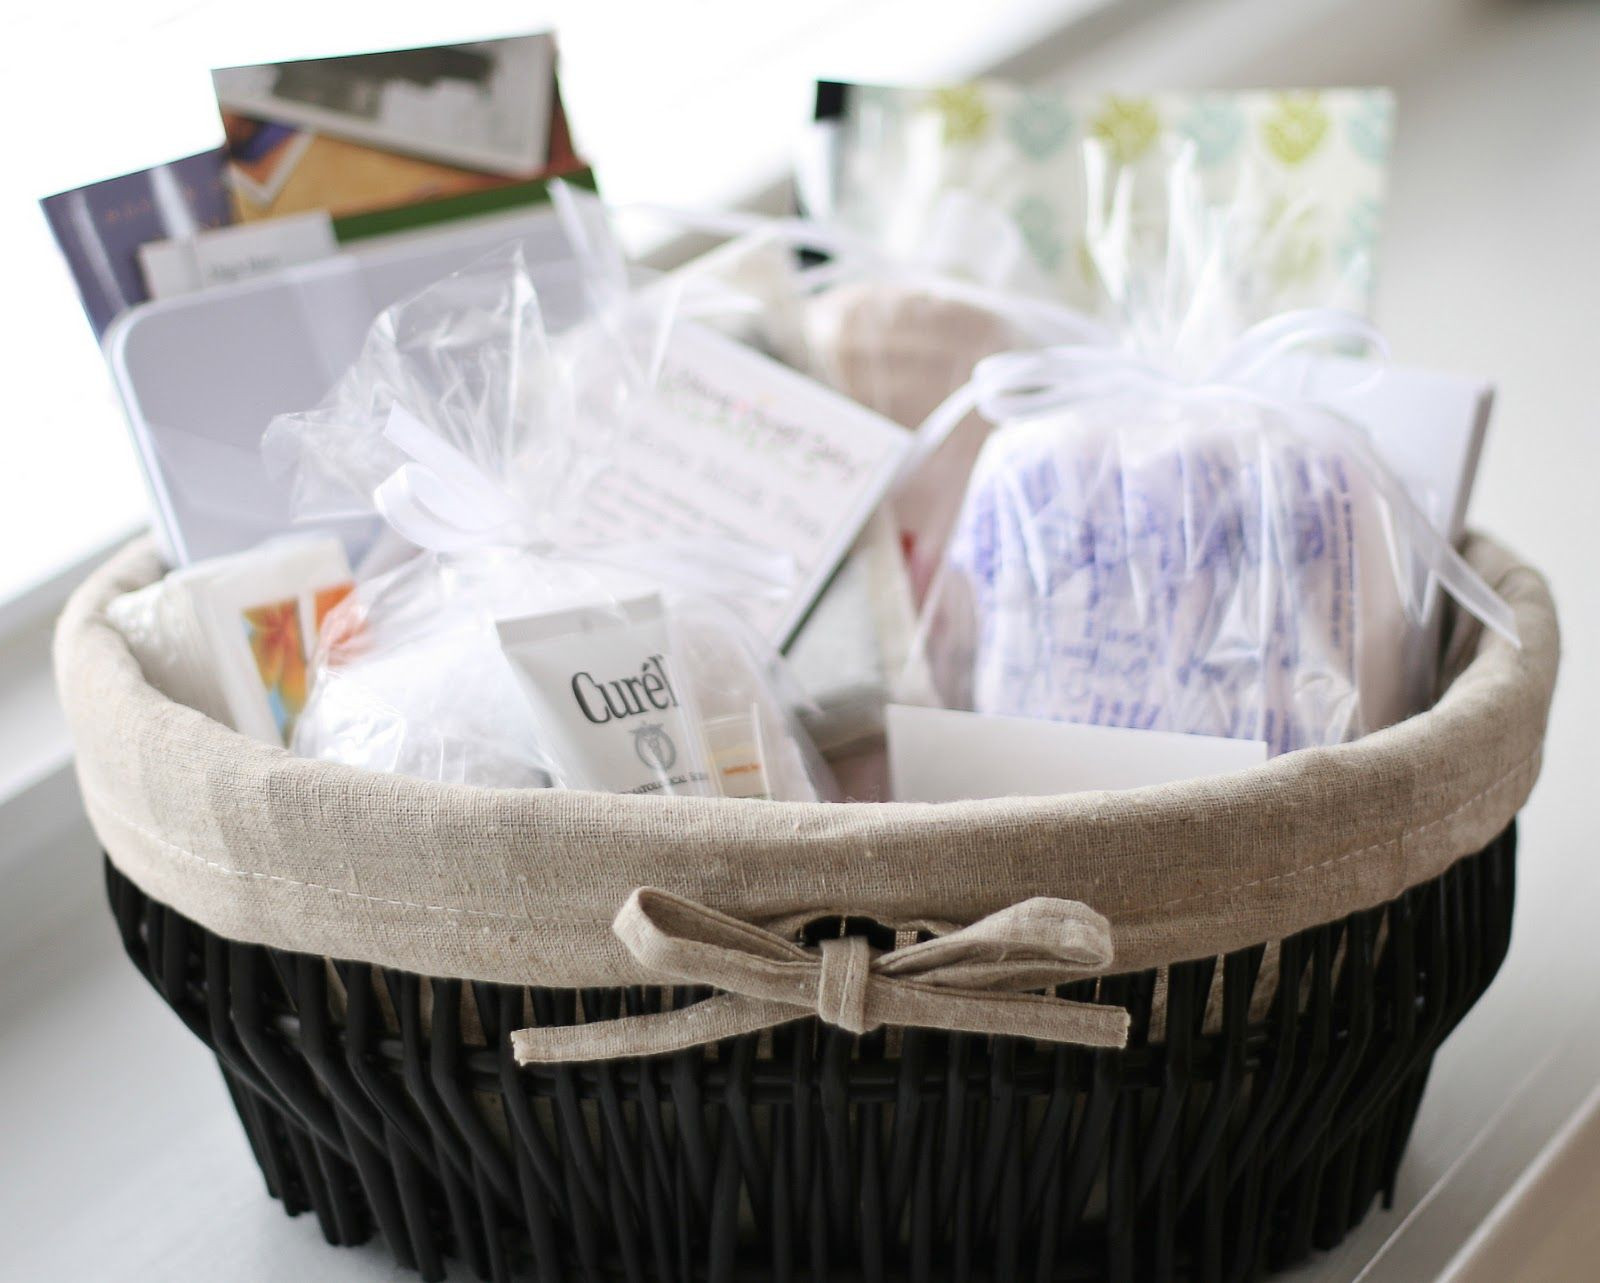 Gift Basket For Child In Hospital
 Pin on Counseling Resources